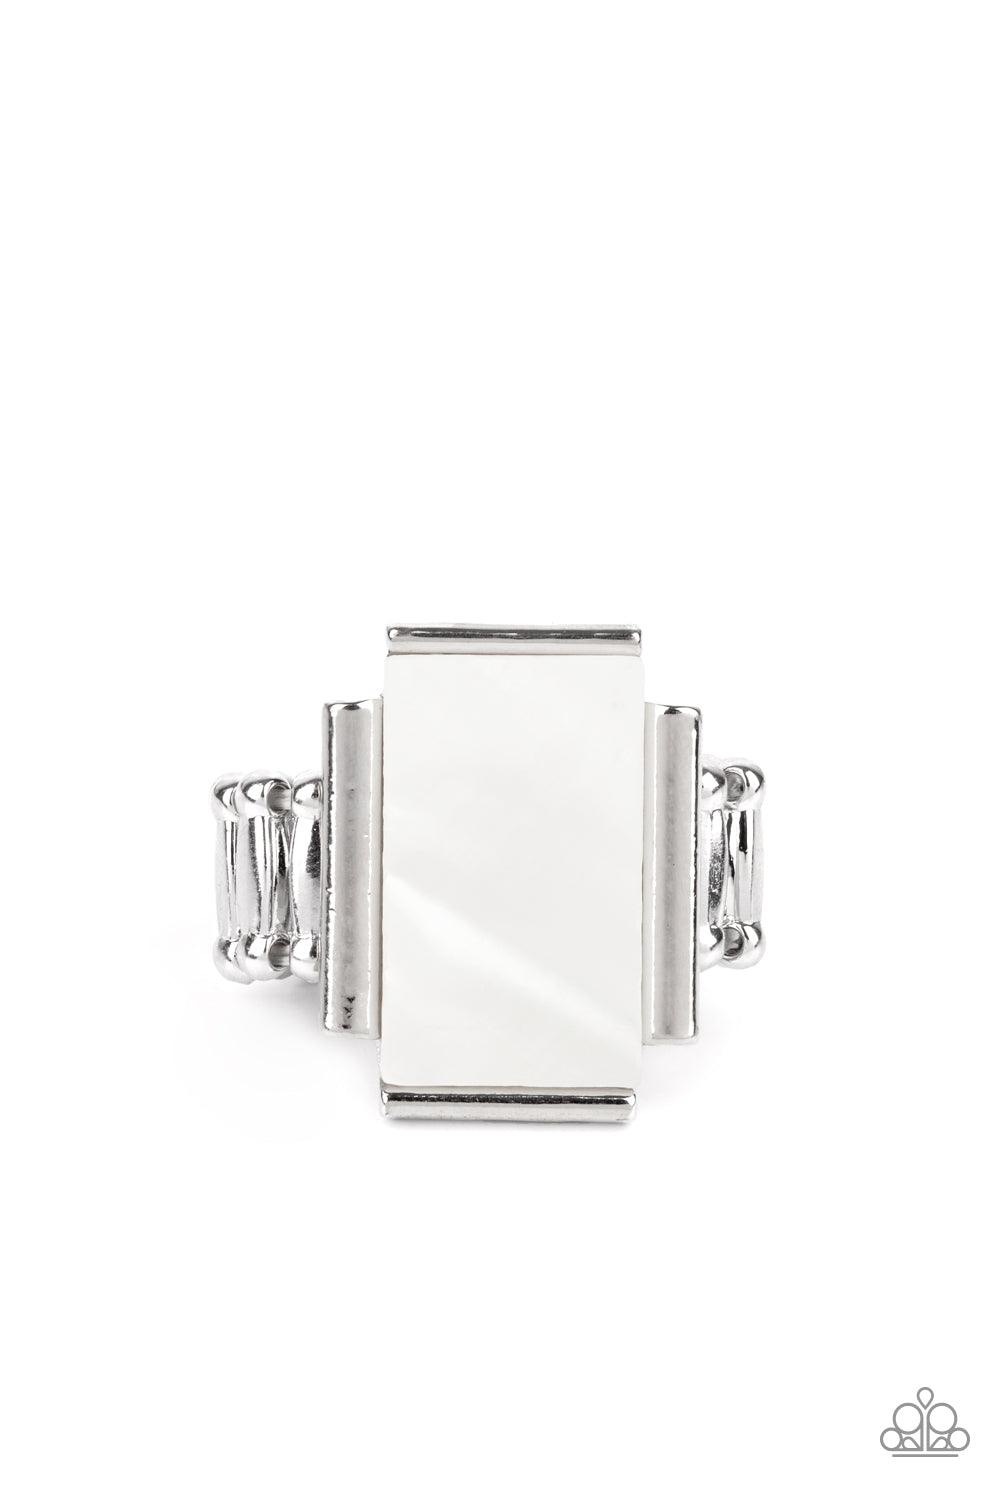 Paparazzi Accessories Mystical Marinas - White Featuring an iridescent shimmer, a white shell-like rectangle is nestled between silver bar-like fittings atop the finger for a mystical look. Features a stretchy band for a flexible fit. Sold as one individu